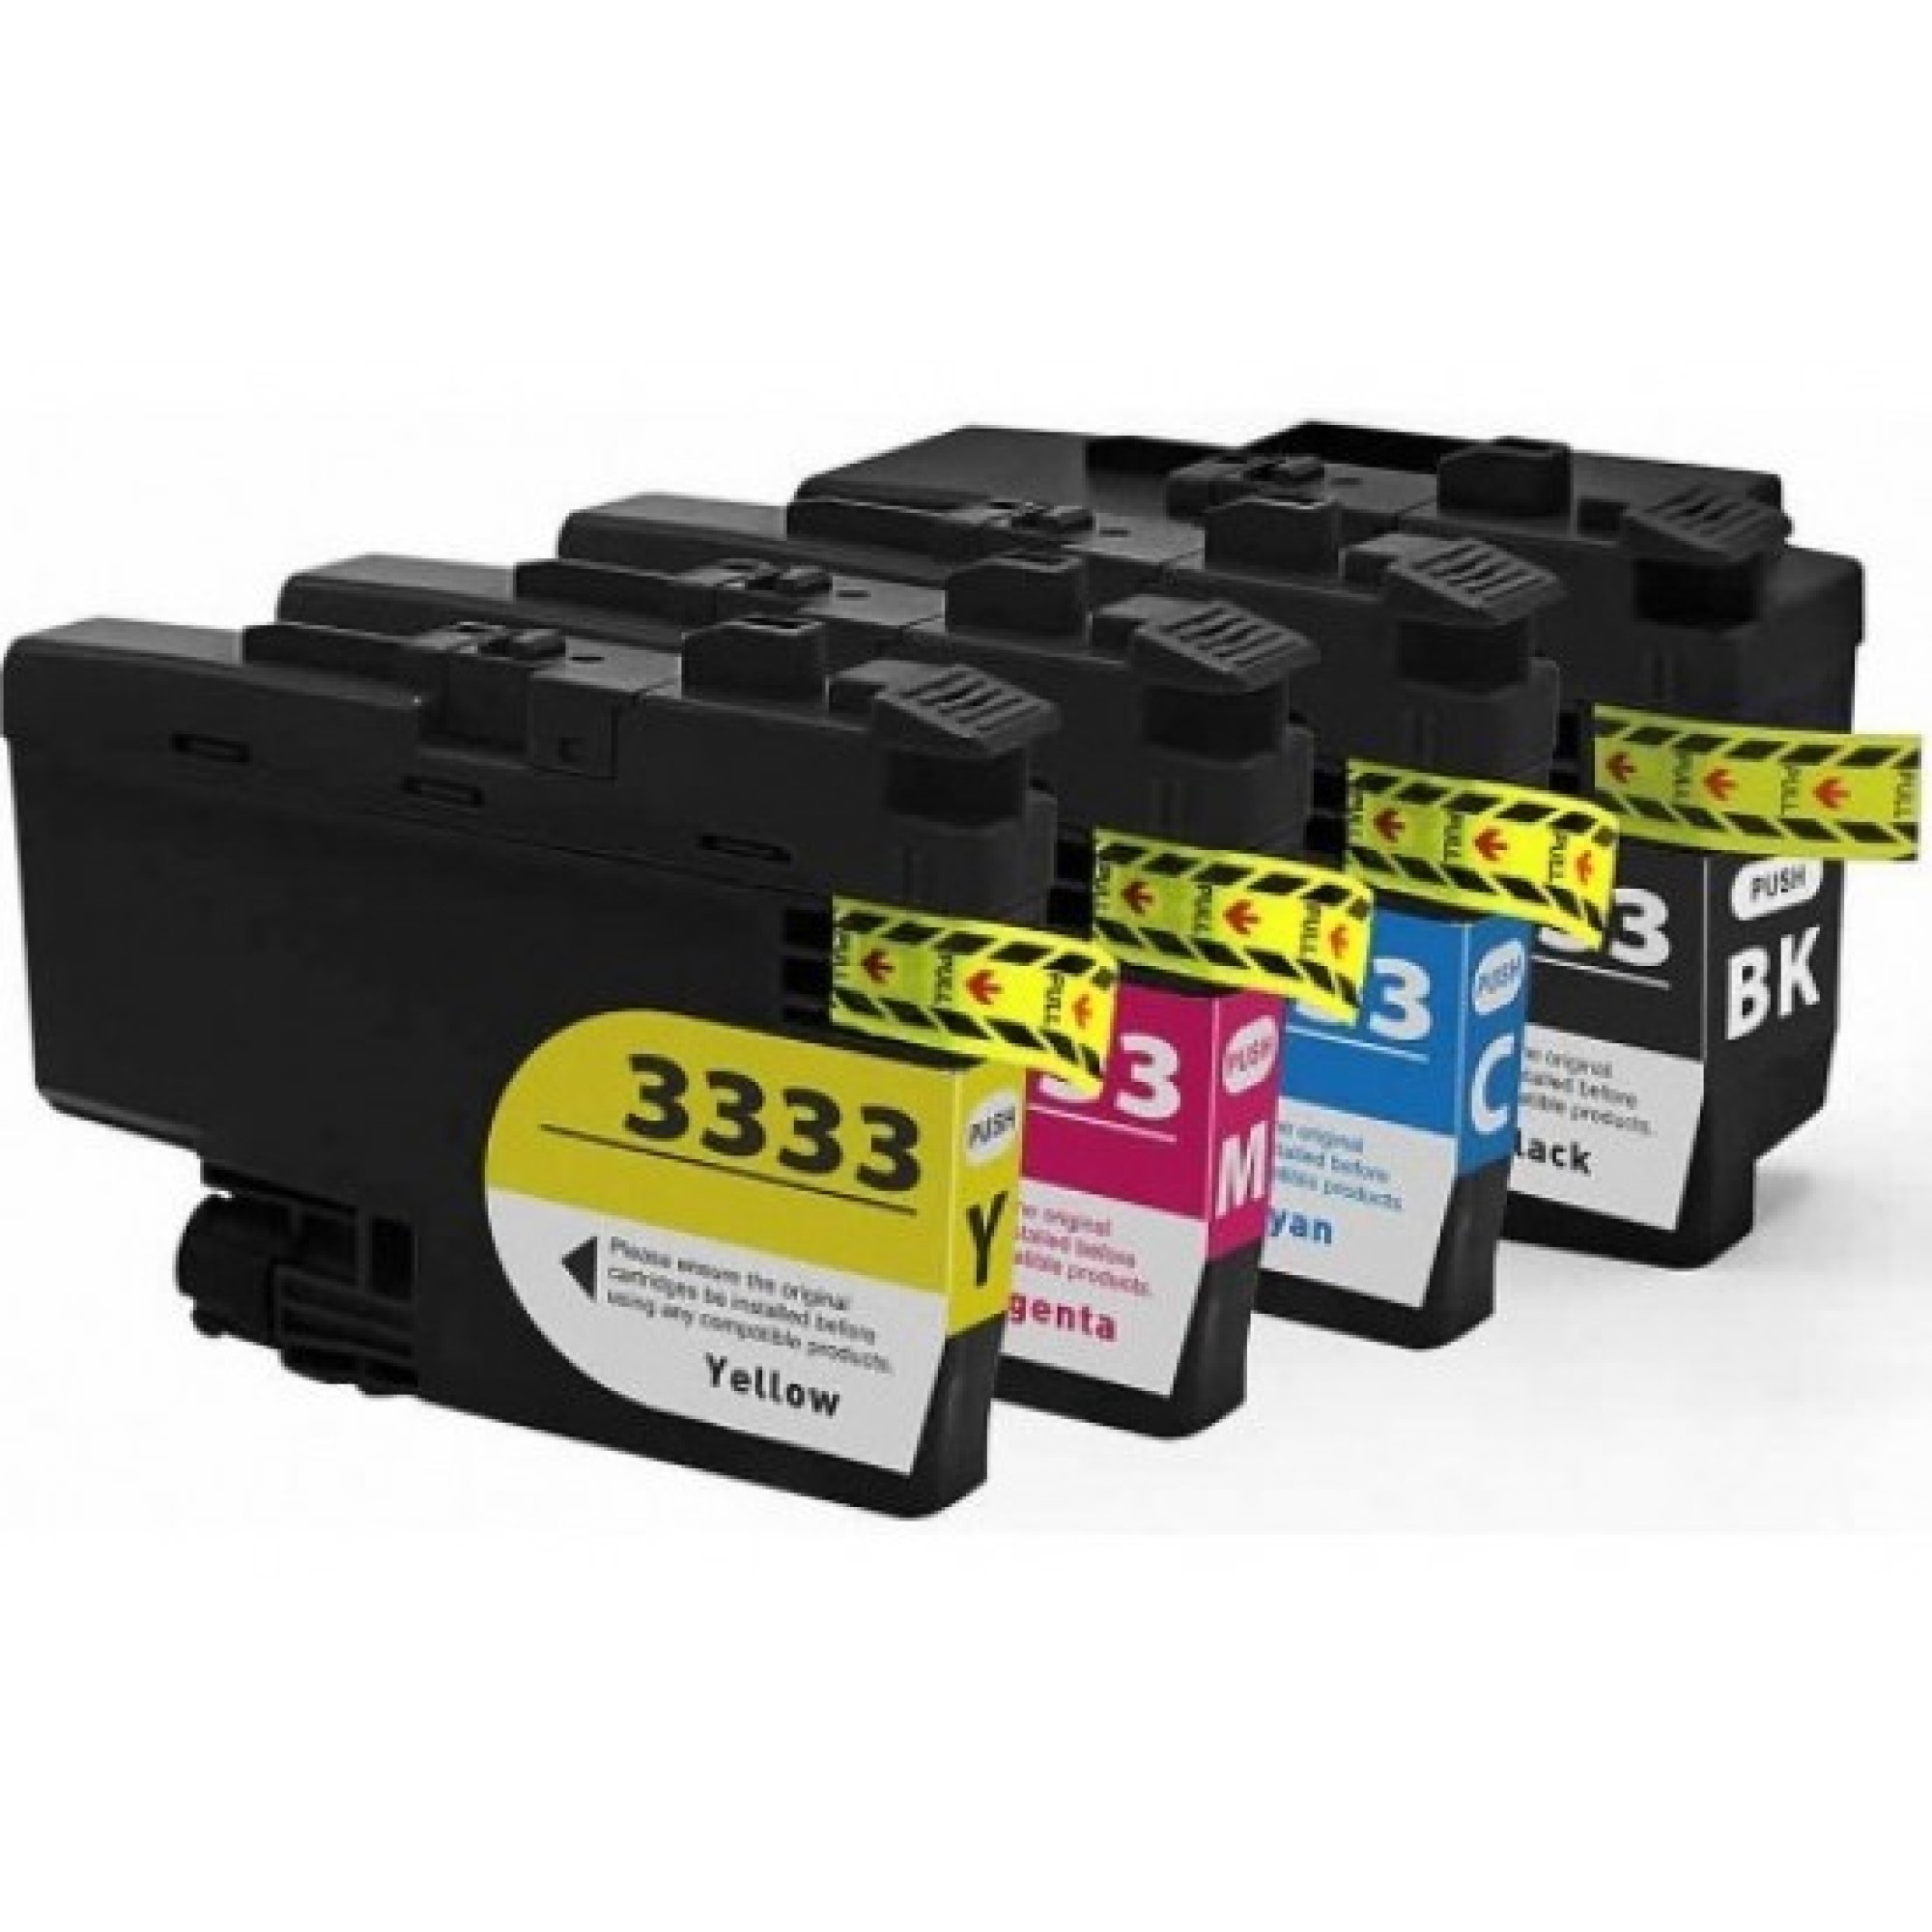 Brother lc3333 Ink Cartridges B+C+M+Y